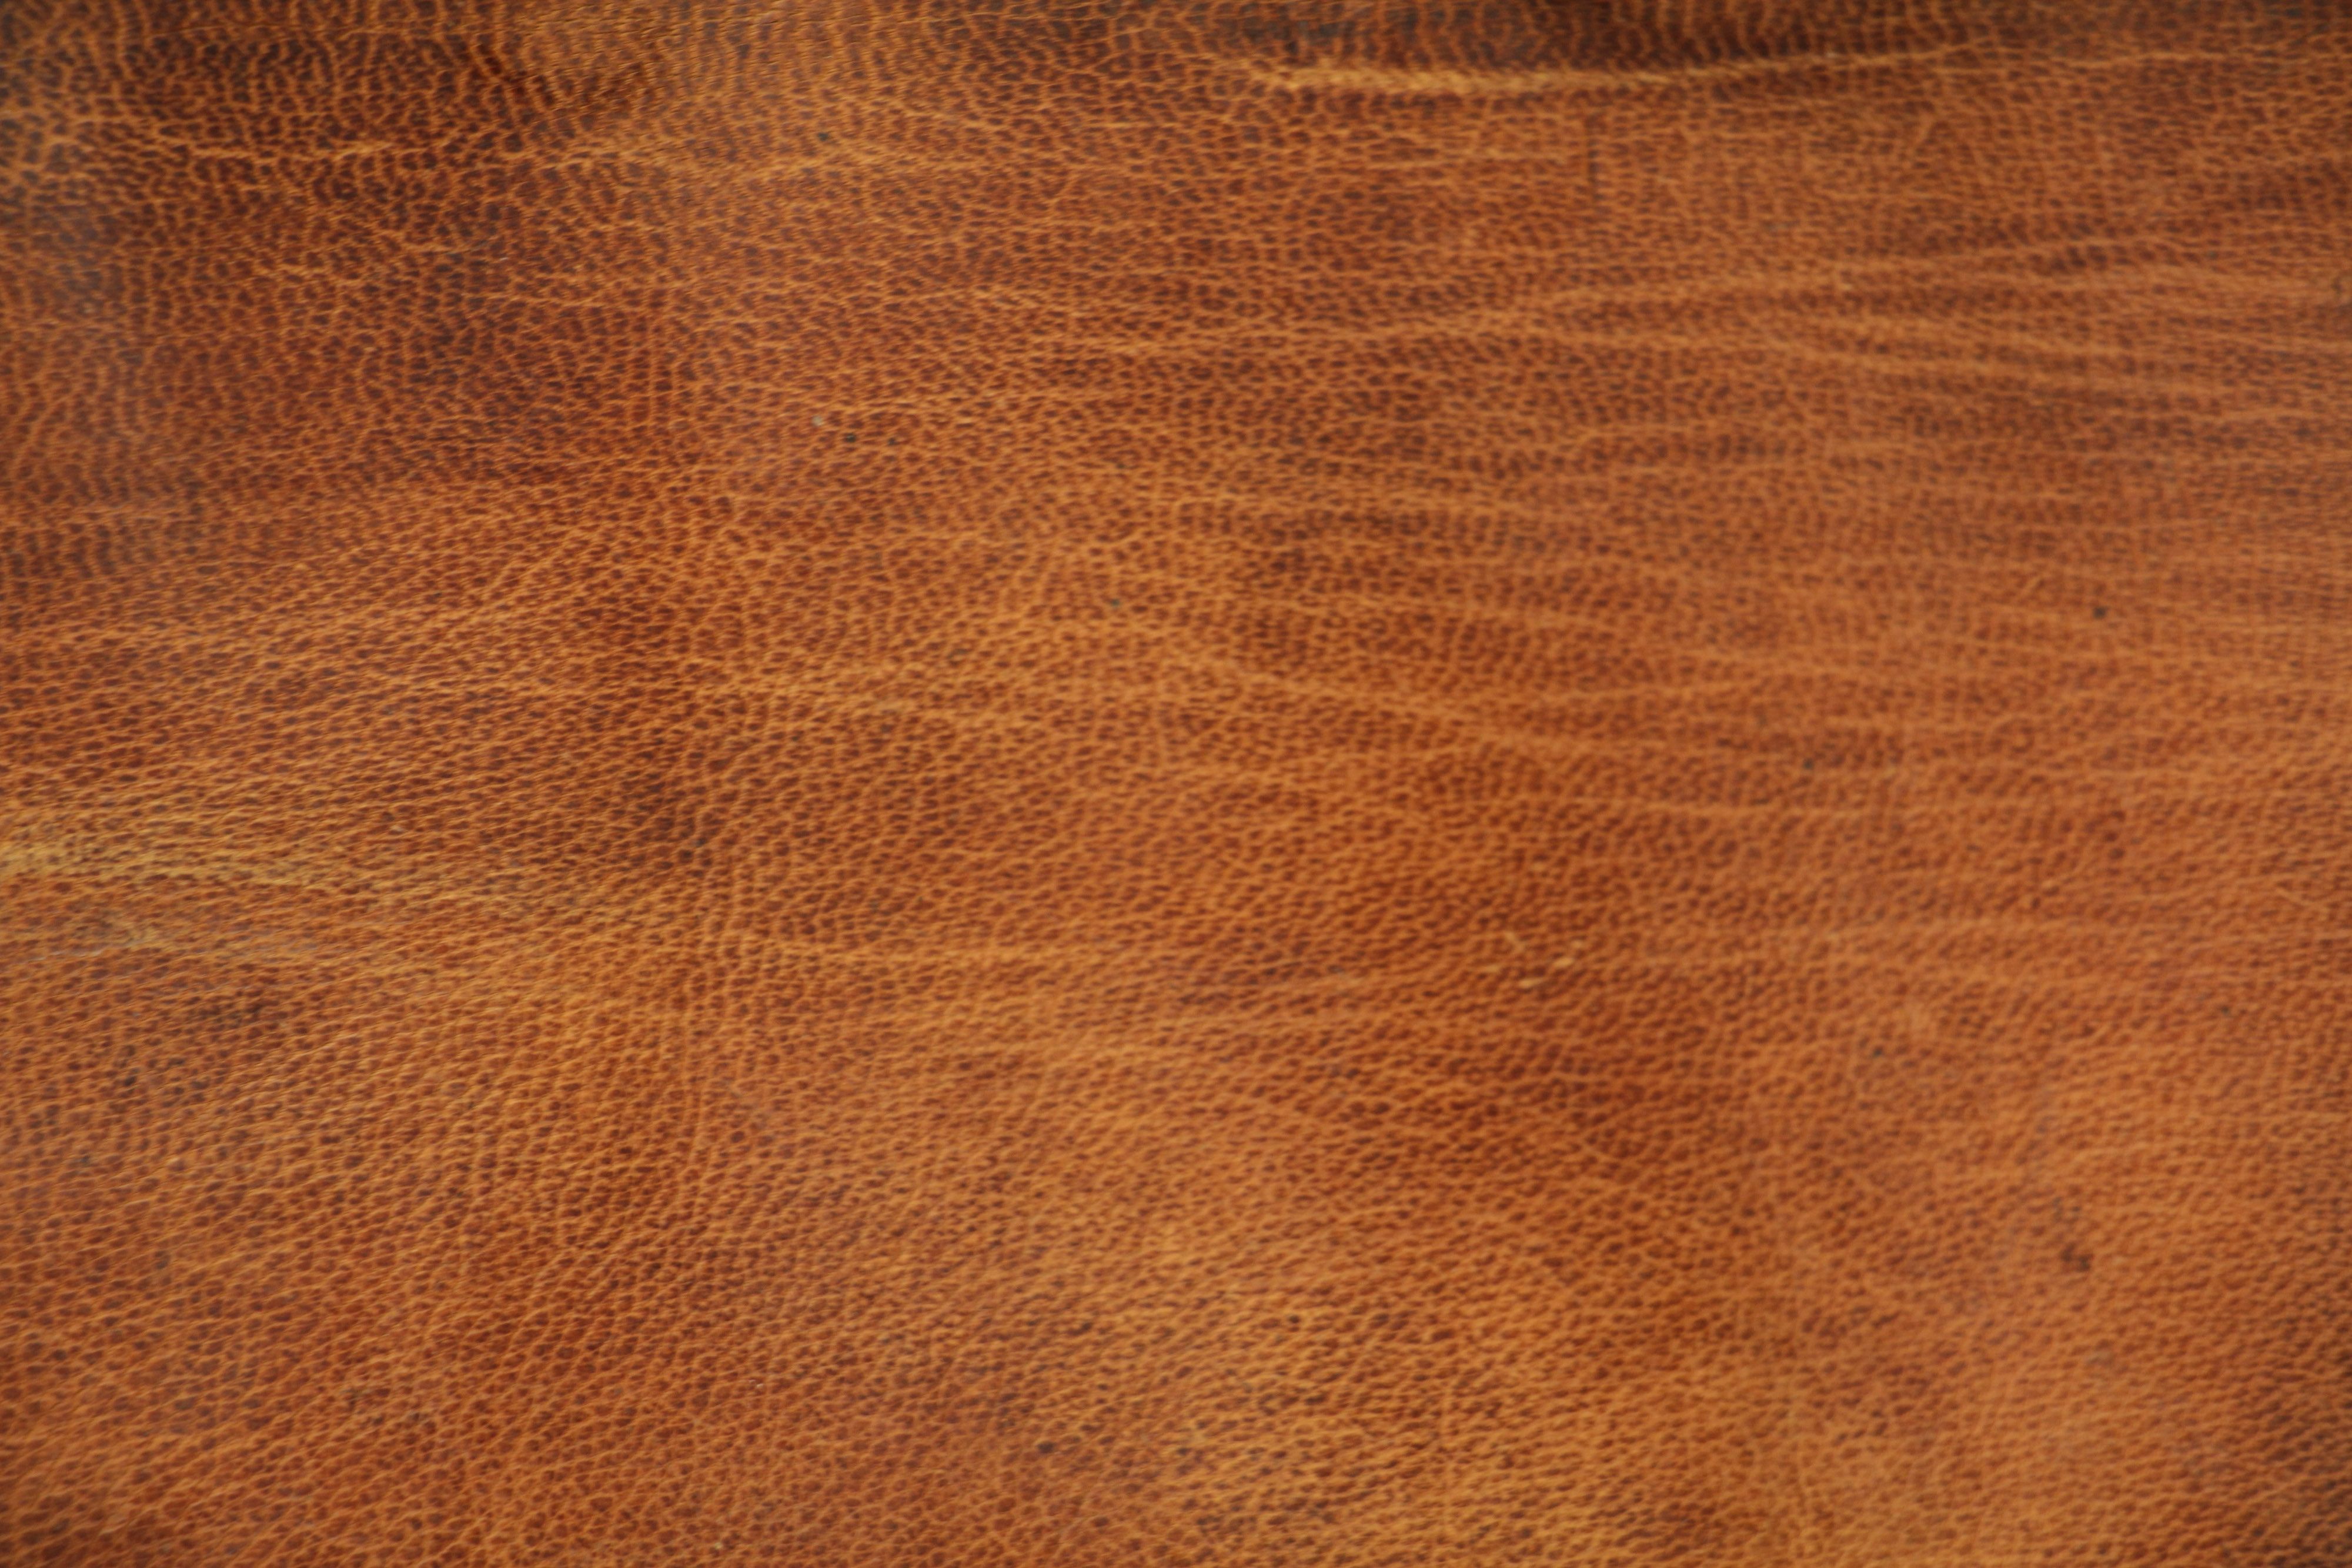 tan leather texture skin wrinkle material fabric background wallpaper